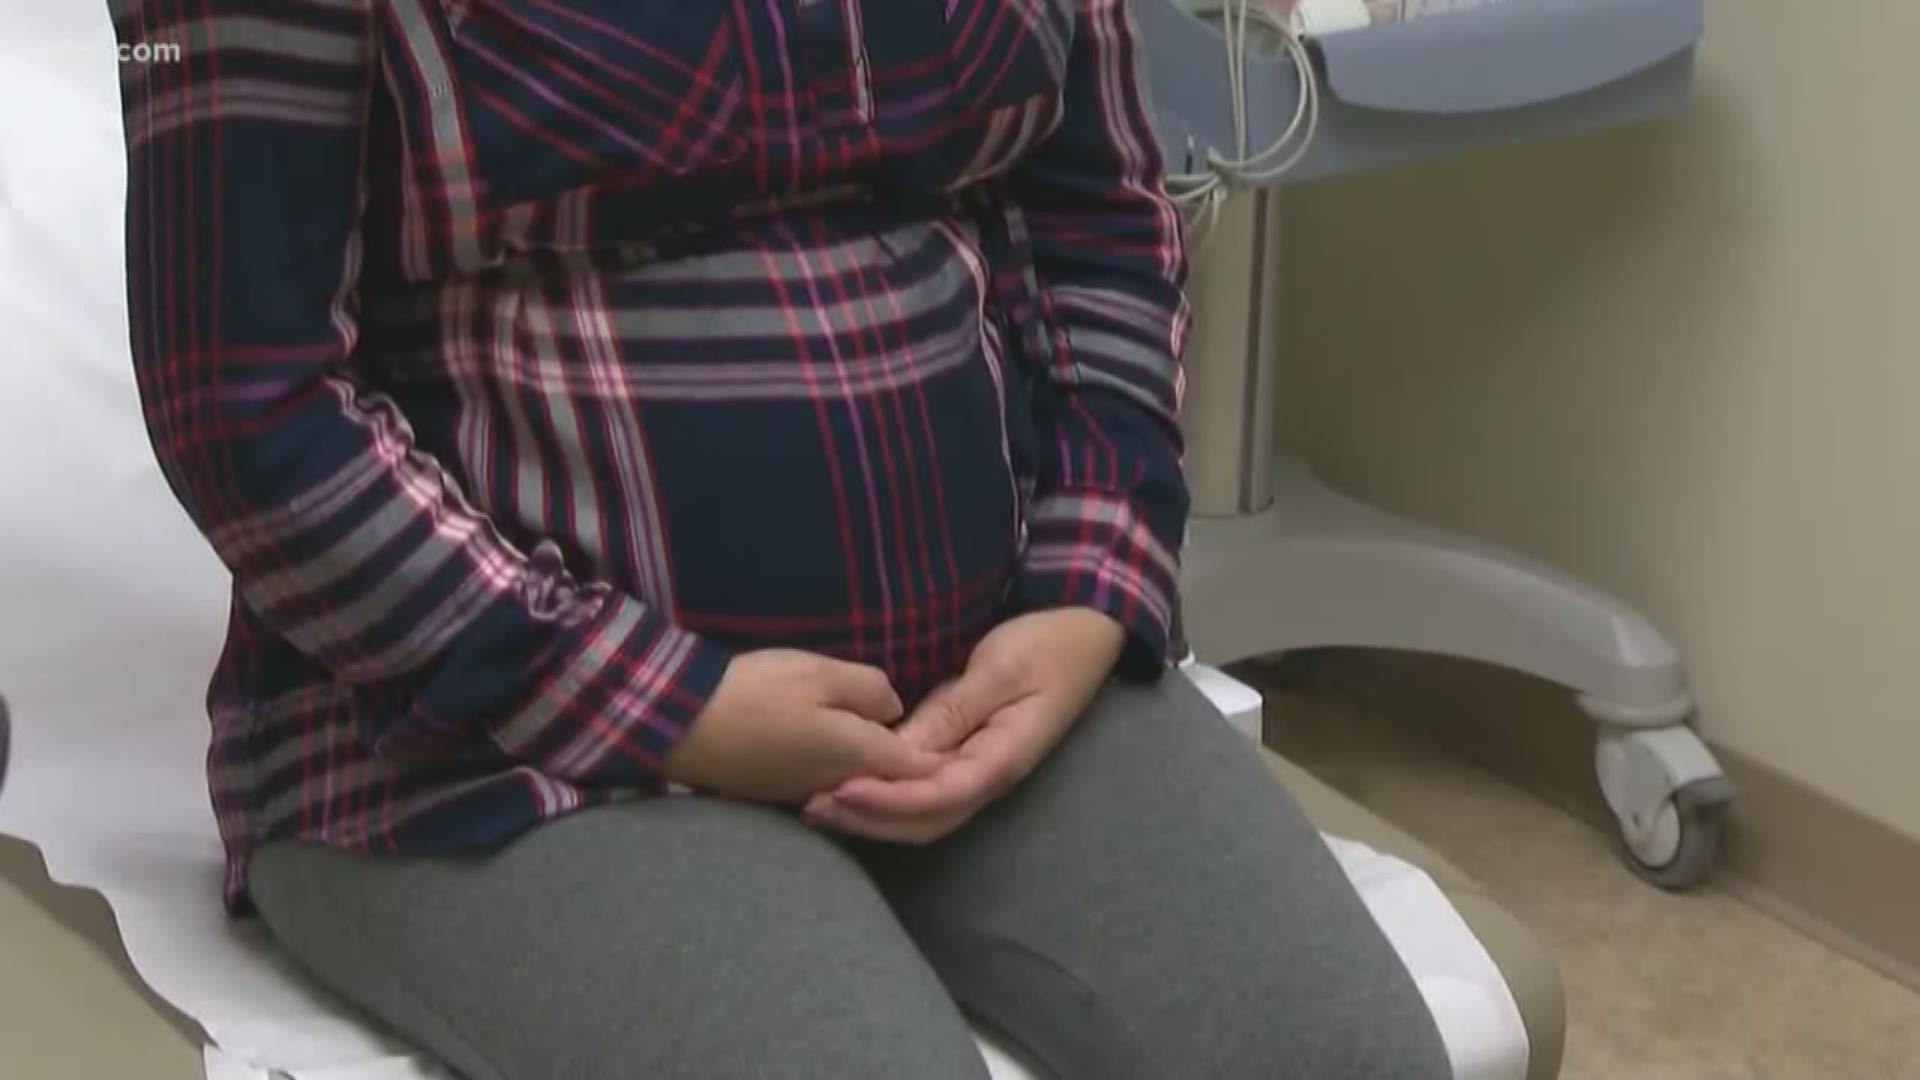 Ohio is using education and technology in a campaign to prevent stillbirths.